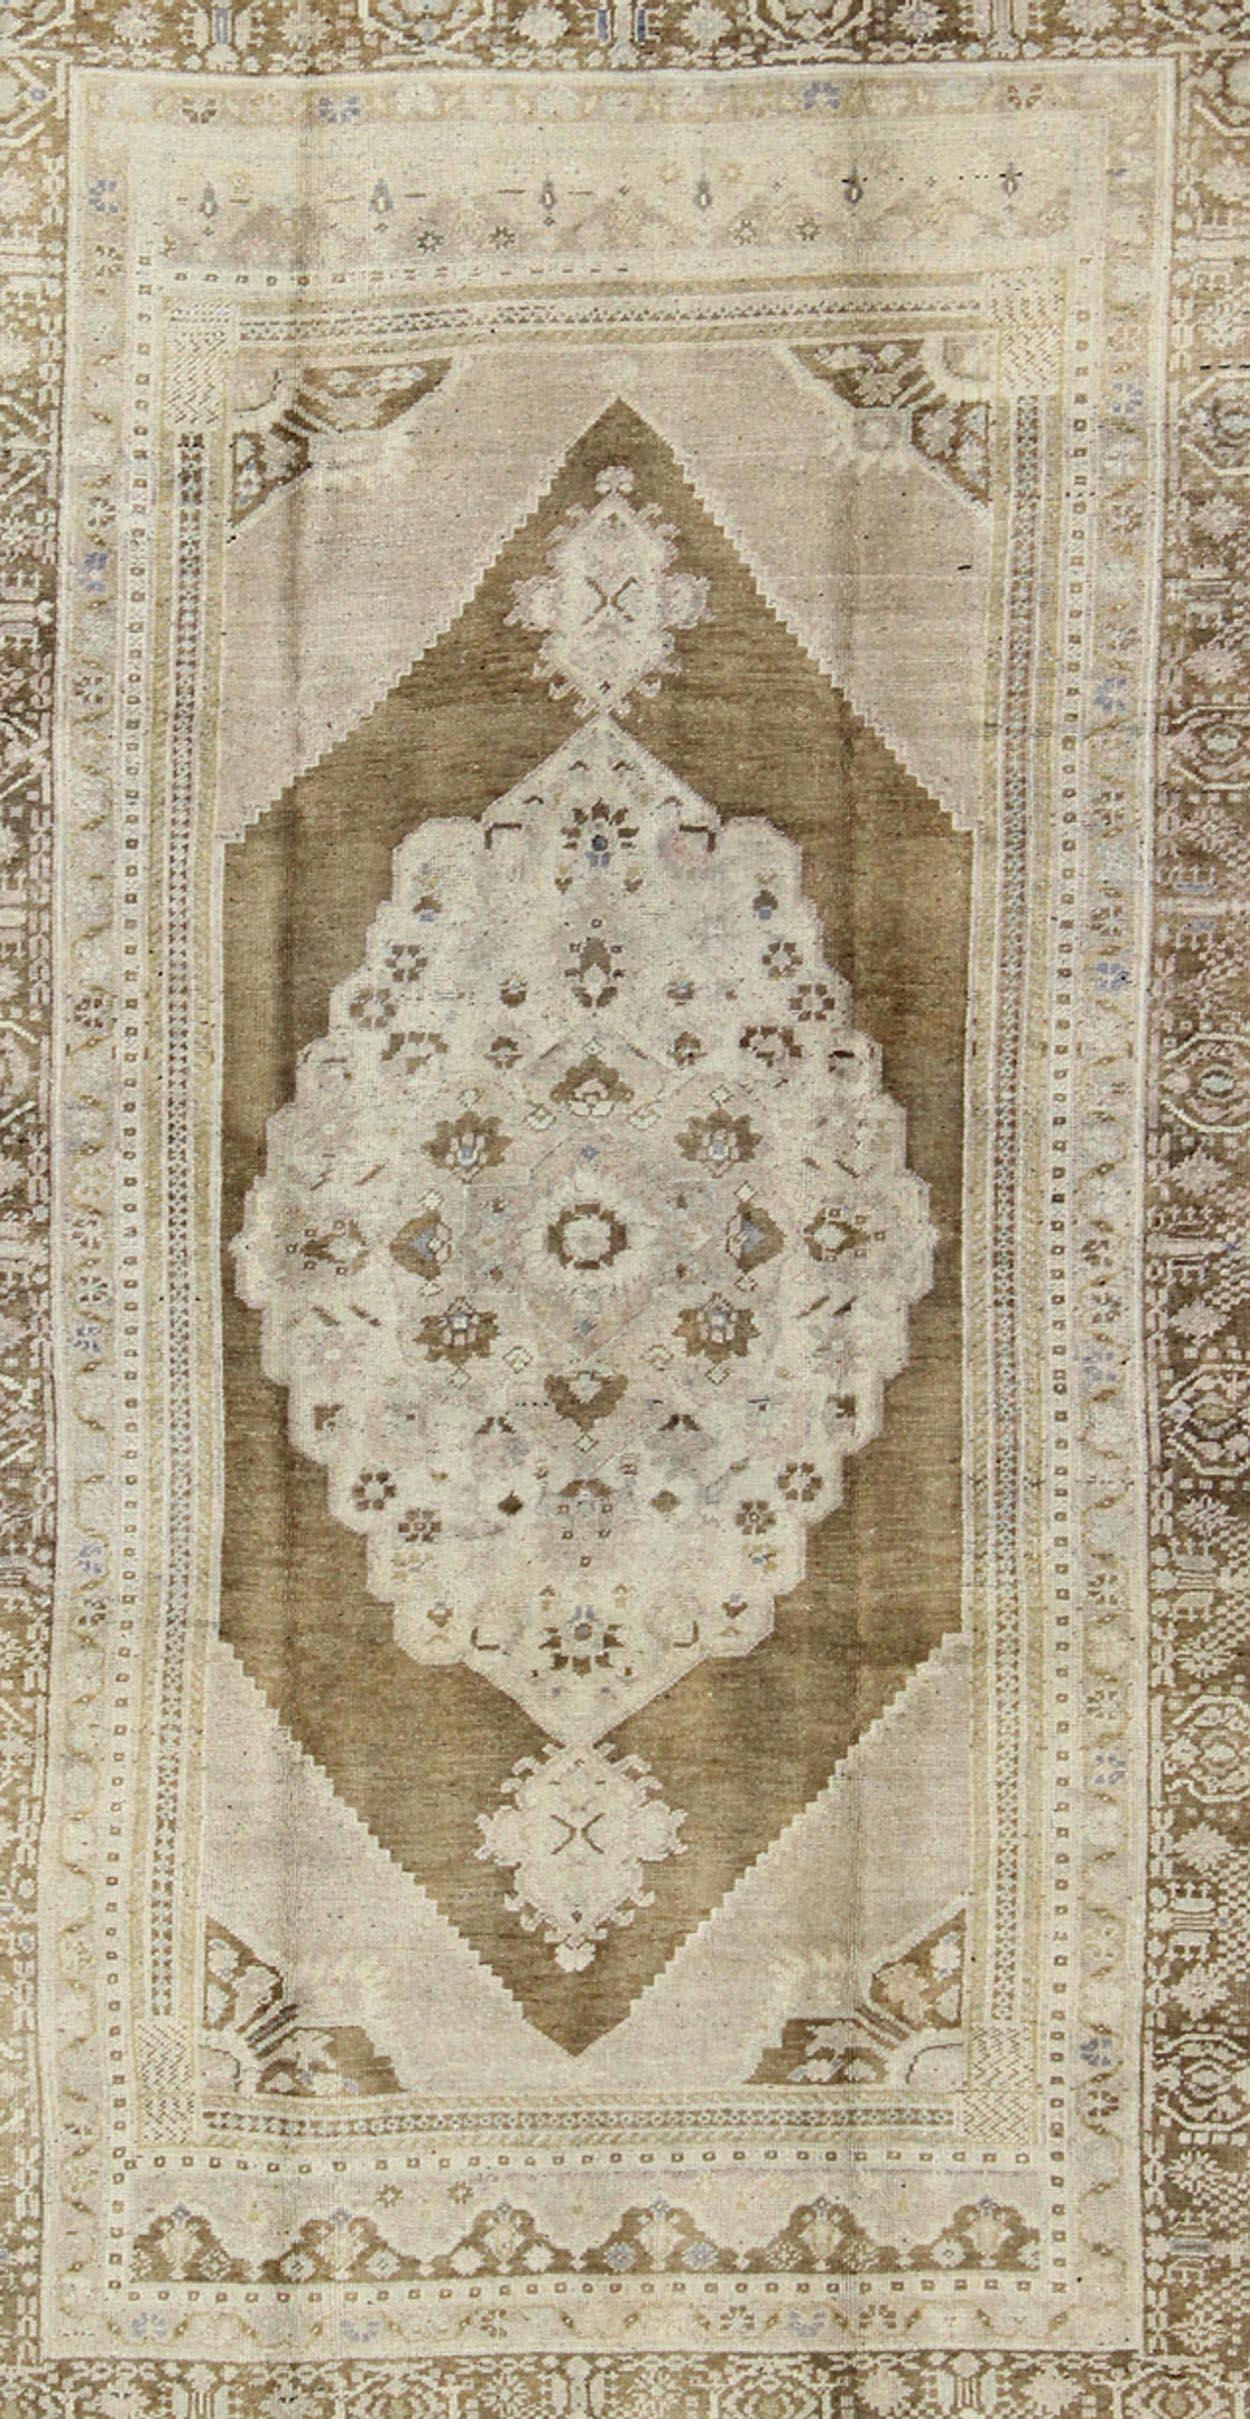 Vintage Turkish Floral Medallion Oushak Rug in Khaki and Brown Tones In Good Condition For Sale In Atlanta, GA